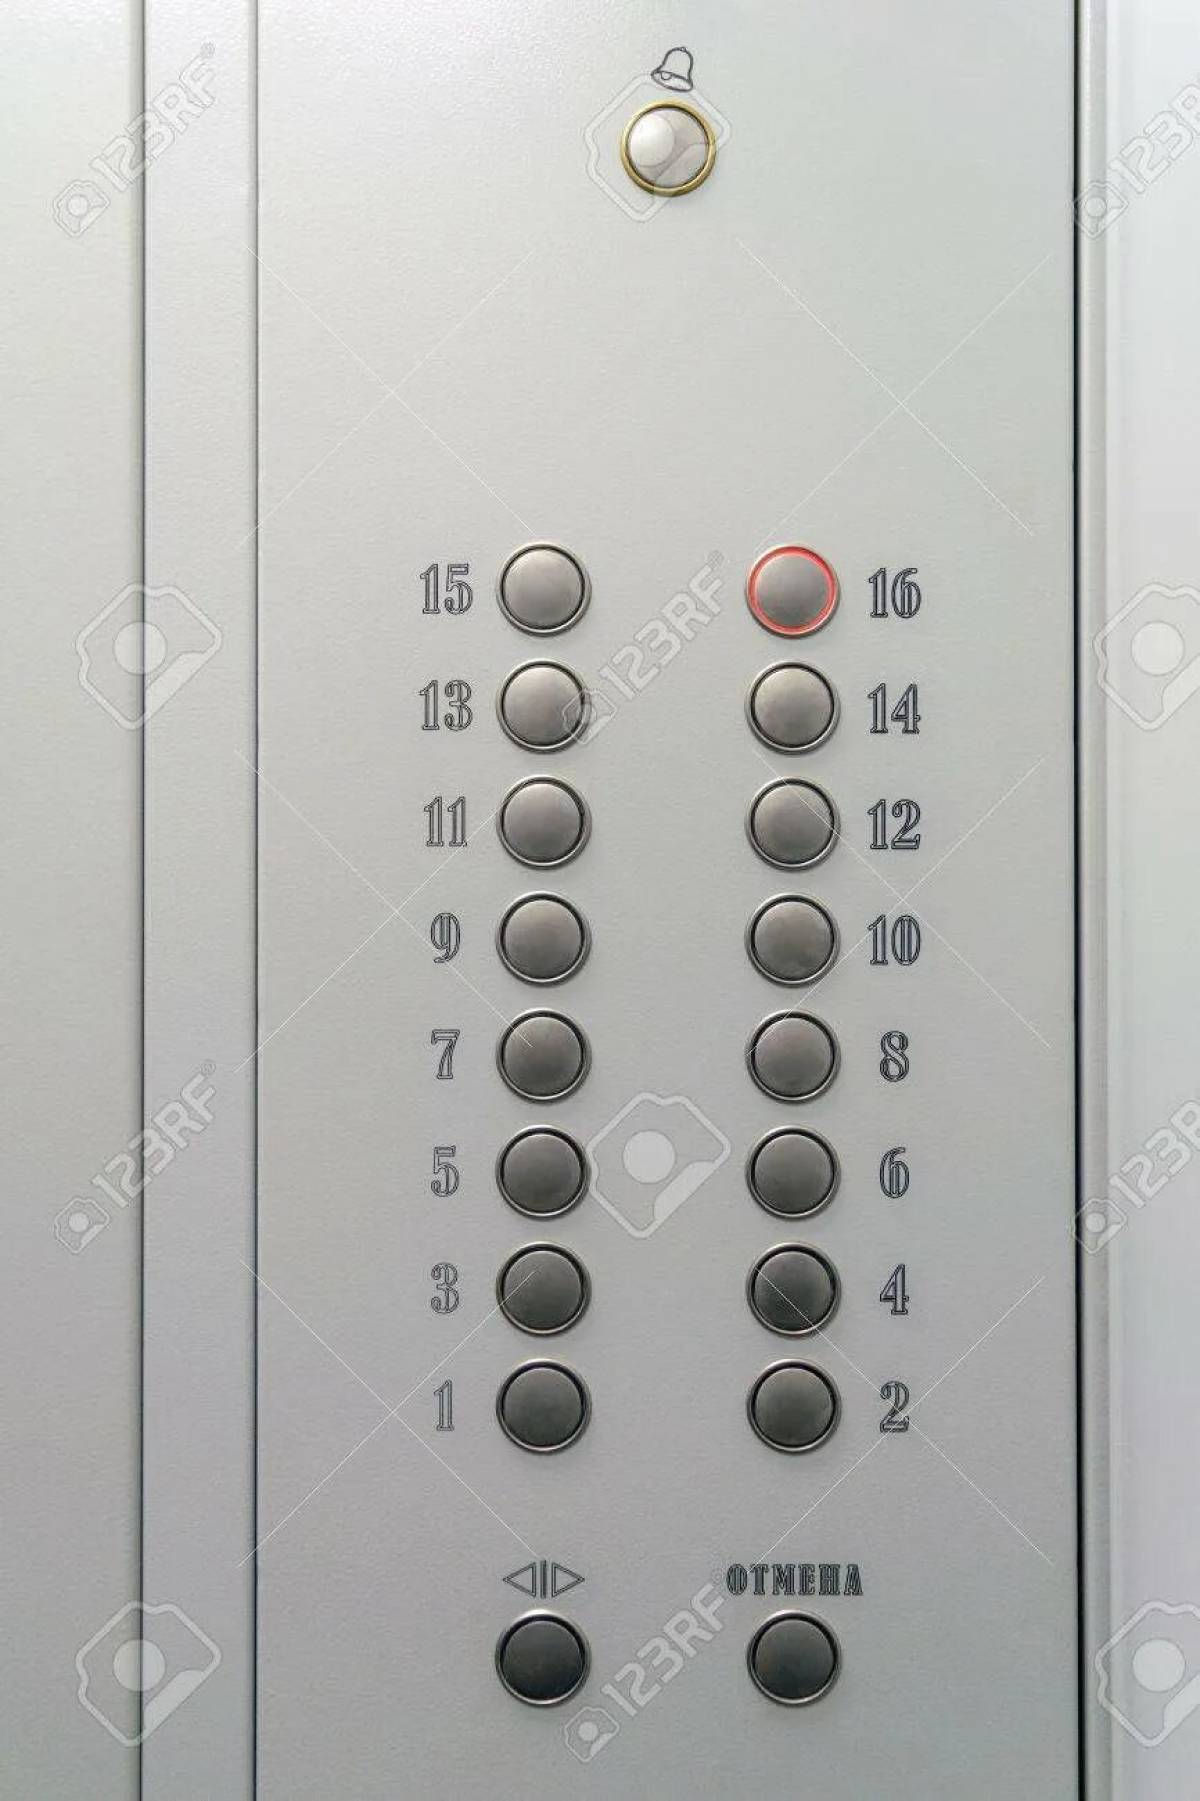 Elevator buttons #15